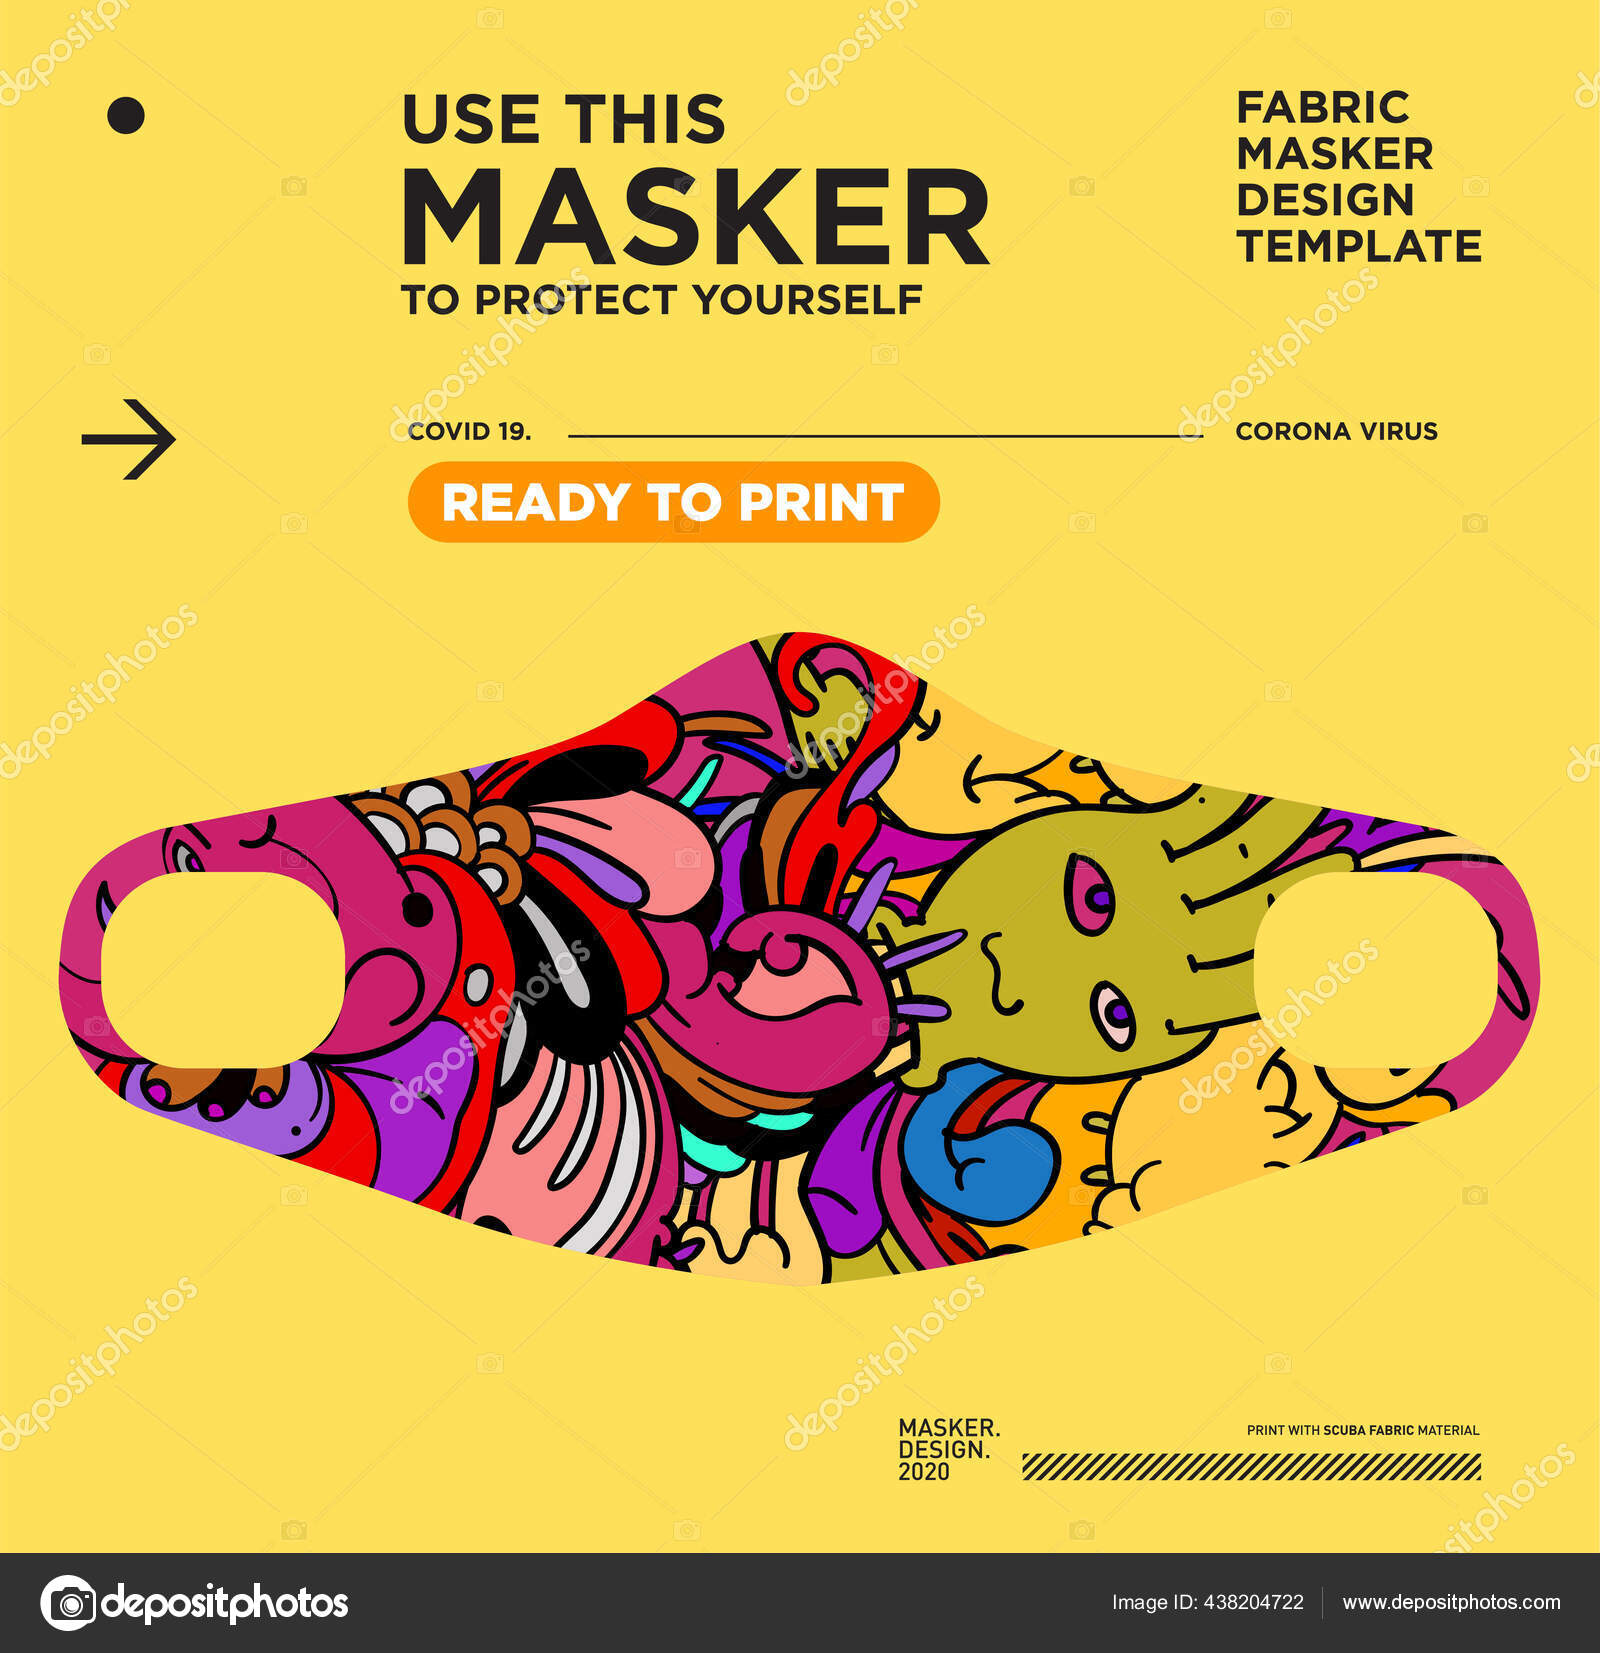 Vector Colorful Abstract Fabric Masker Ready Viruses Stock Illustration #438204722